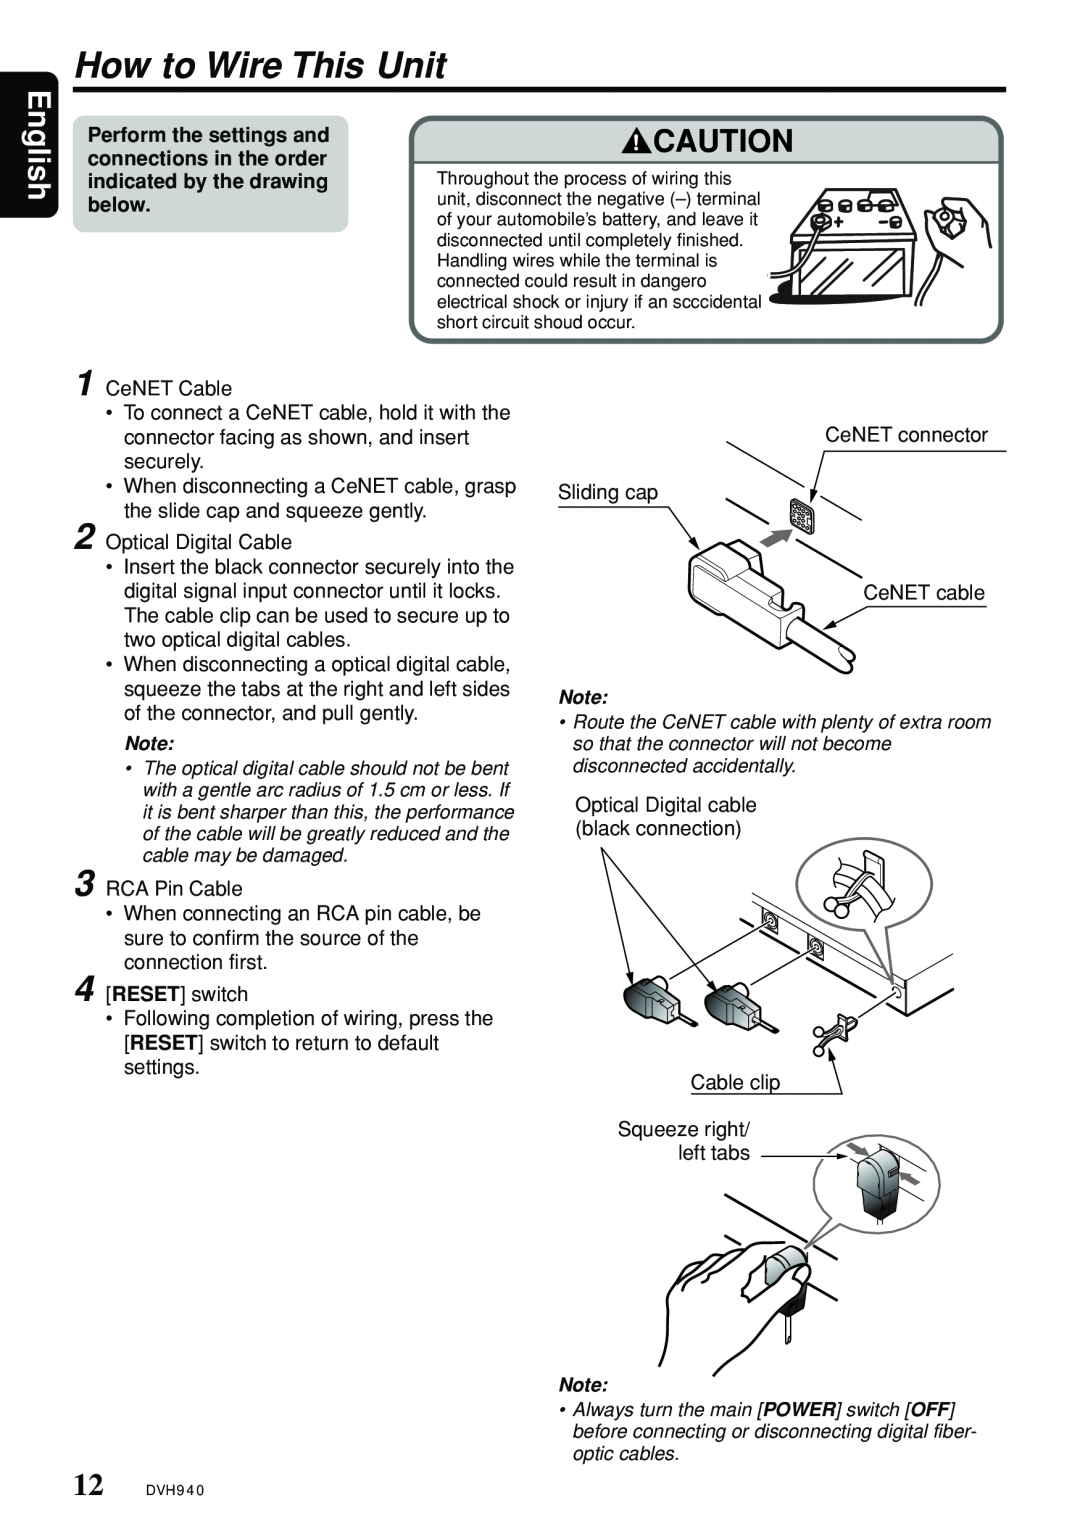 Clarion DVH940N owner manual How to Wire This Unit, English 